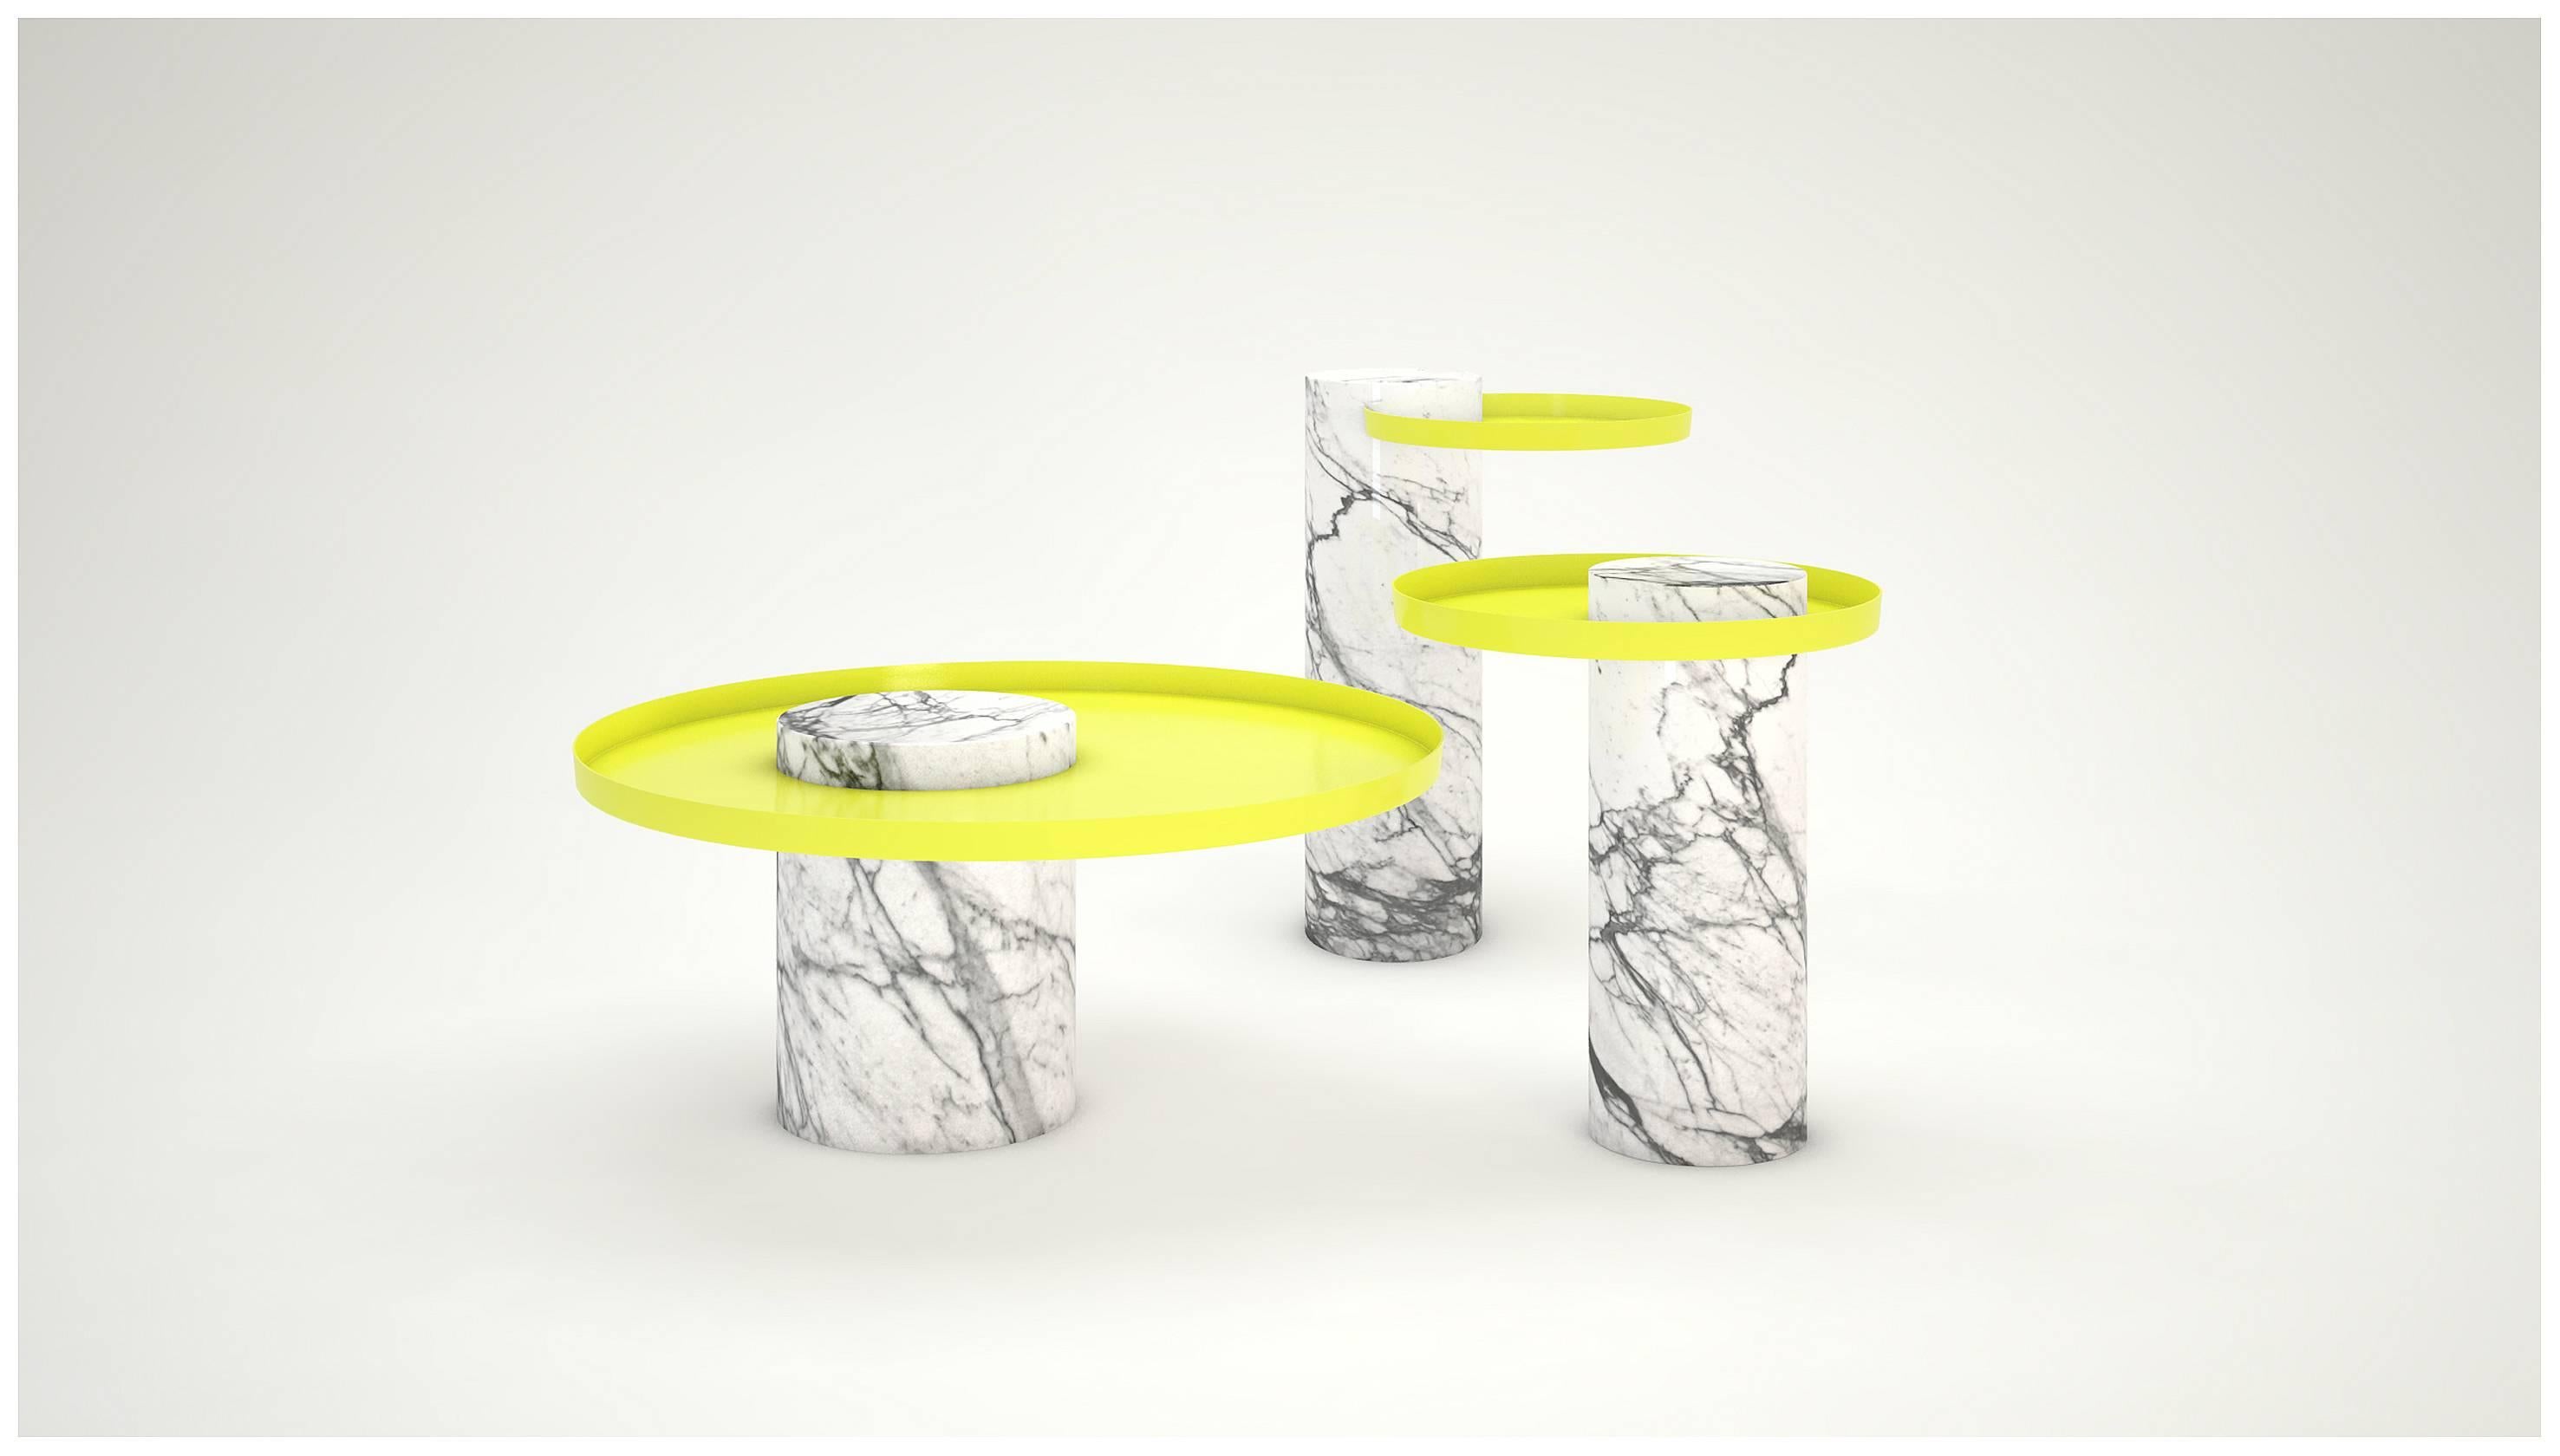 Pair of contemporary gueridon, Sebastian Herkner

The salute table exists in 3 sizes, 3 different marbles for the column and 4 different finishes for the tray for a virtually endless number of configurations. In addition, salute can be made